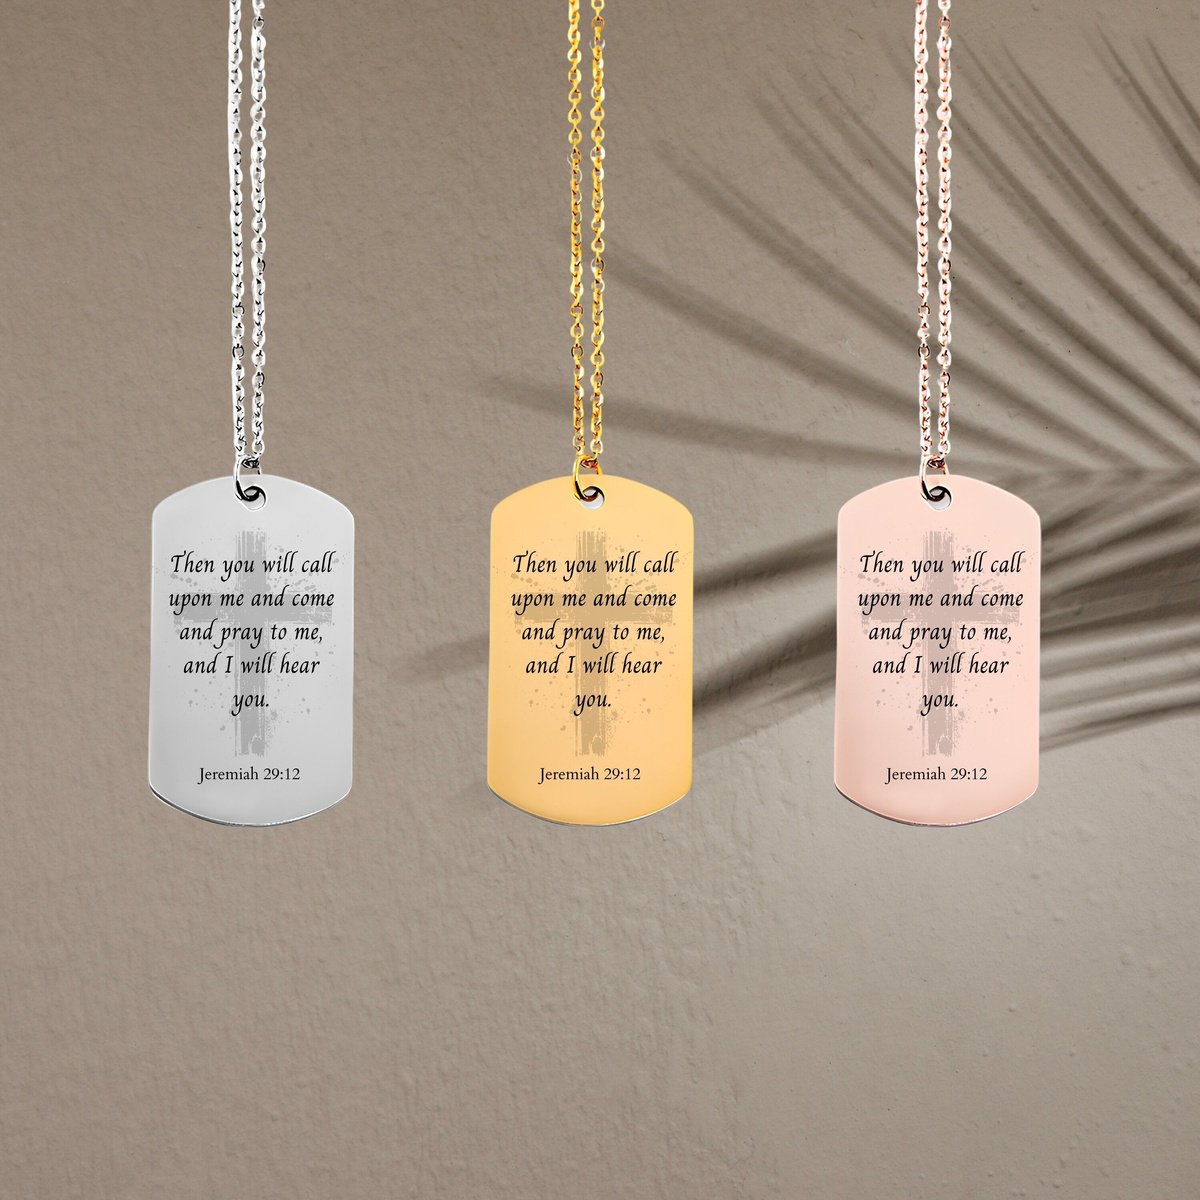 Jeremiah 29 12 quote necklace, gold bible verse, 14k gold cross charm necklace, confirmation gift, gold bar tag necklace,religious scripture